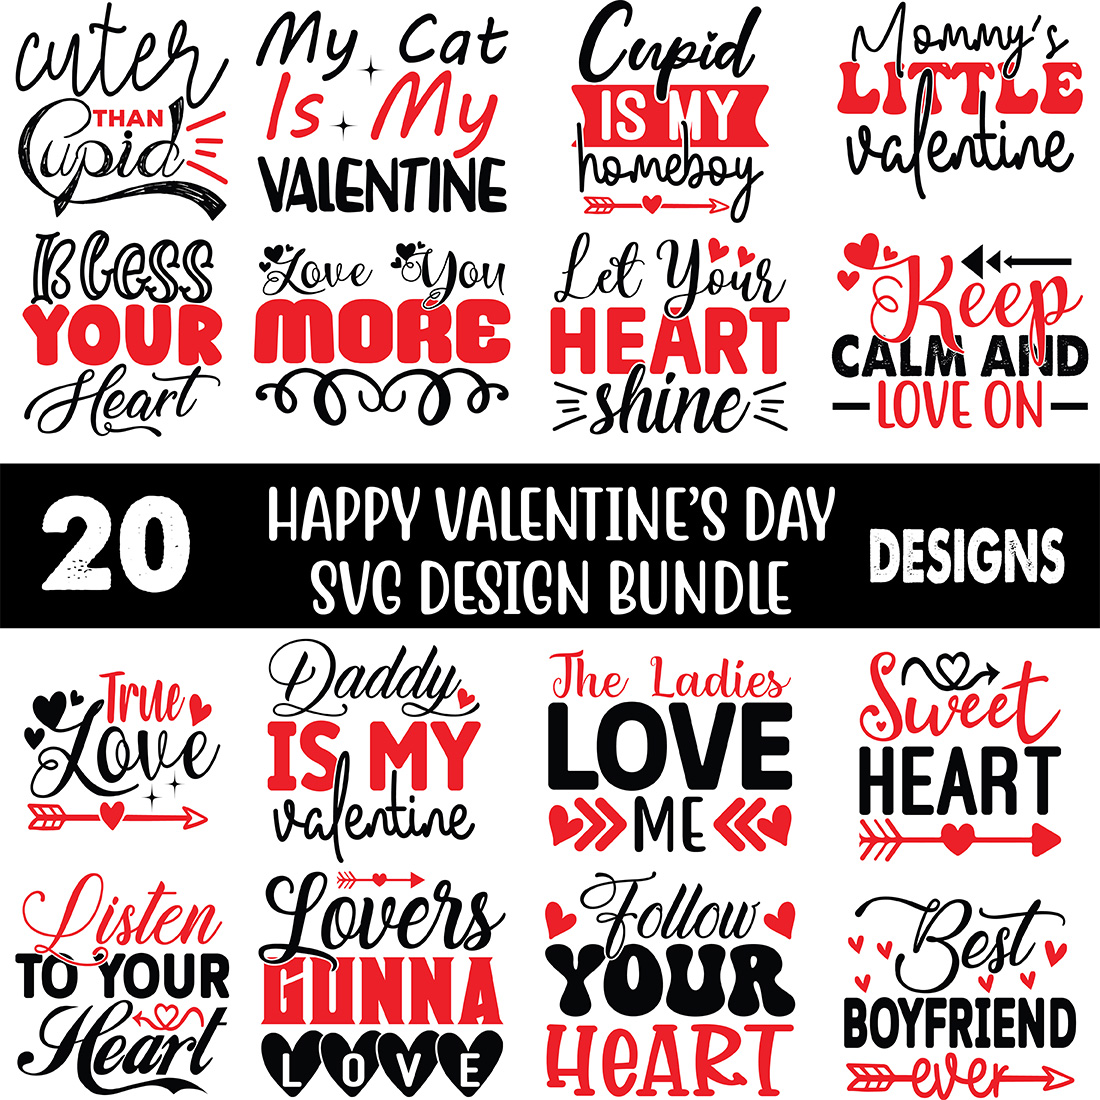 Pack of colorful images for prints on the theme of Happy Valentines Day